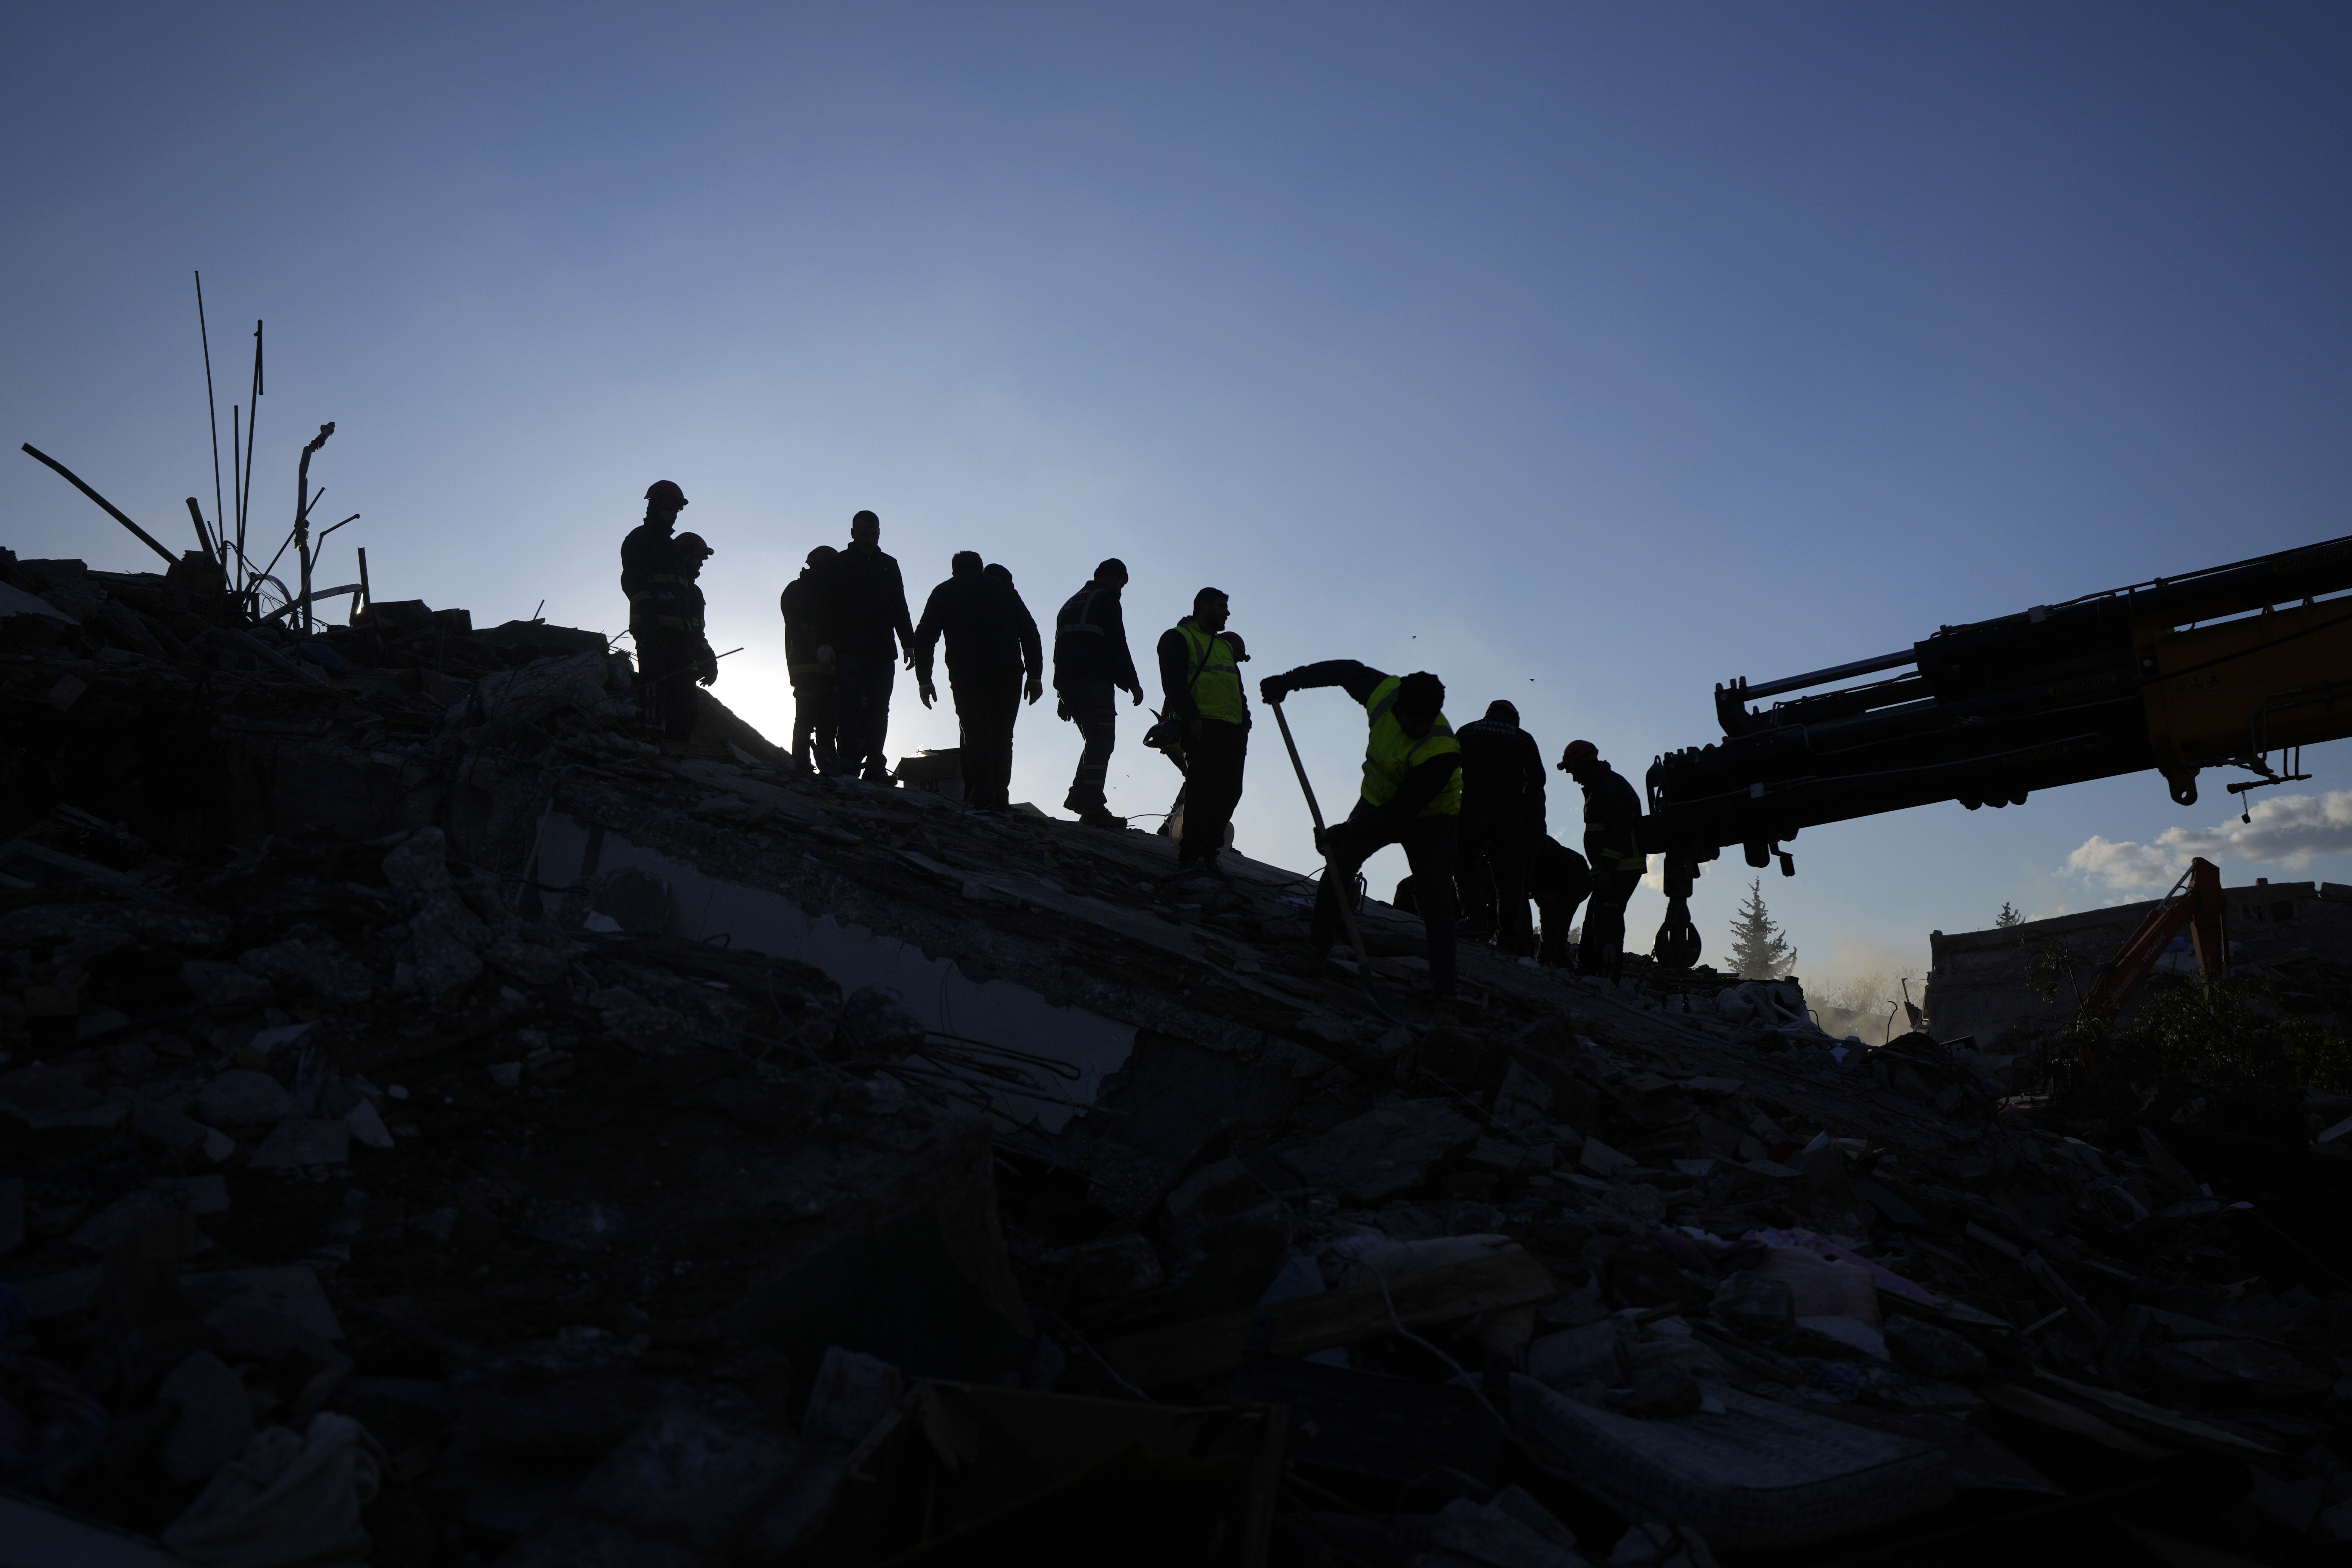 Rescue teams search for people among the rubble of destroyed buildings in Antakya, southern Turkey, on February 8, 2023. As hopes of finding survivors dwindled, exhausted rescue teams in Turkey and Syria searched for signs of life among the thousands of buildings demolished by a catastrophic earthquake.  (AP Photo/Khalil Hamra)